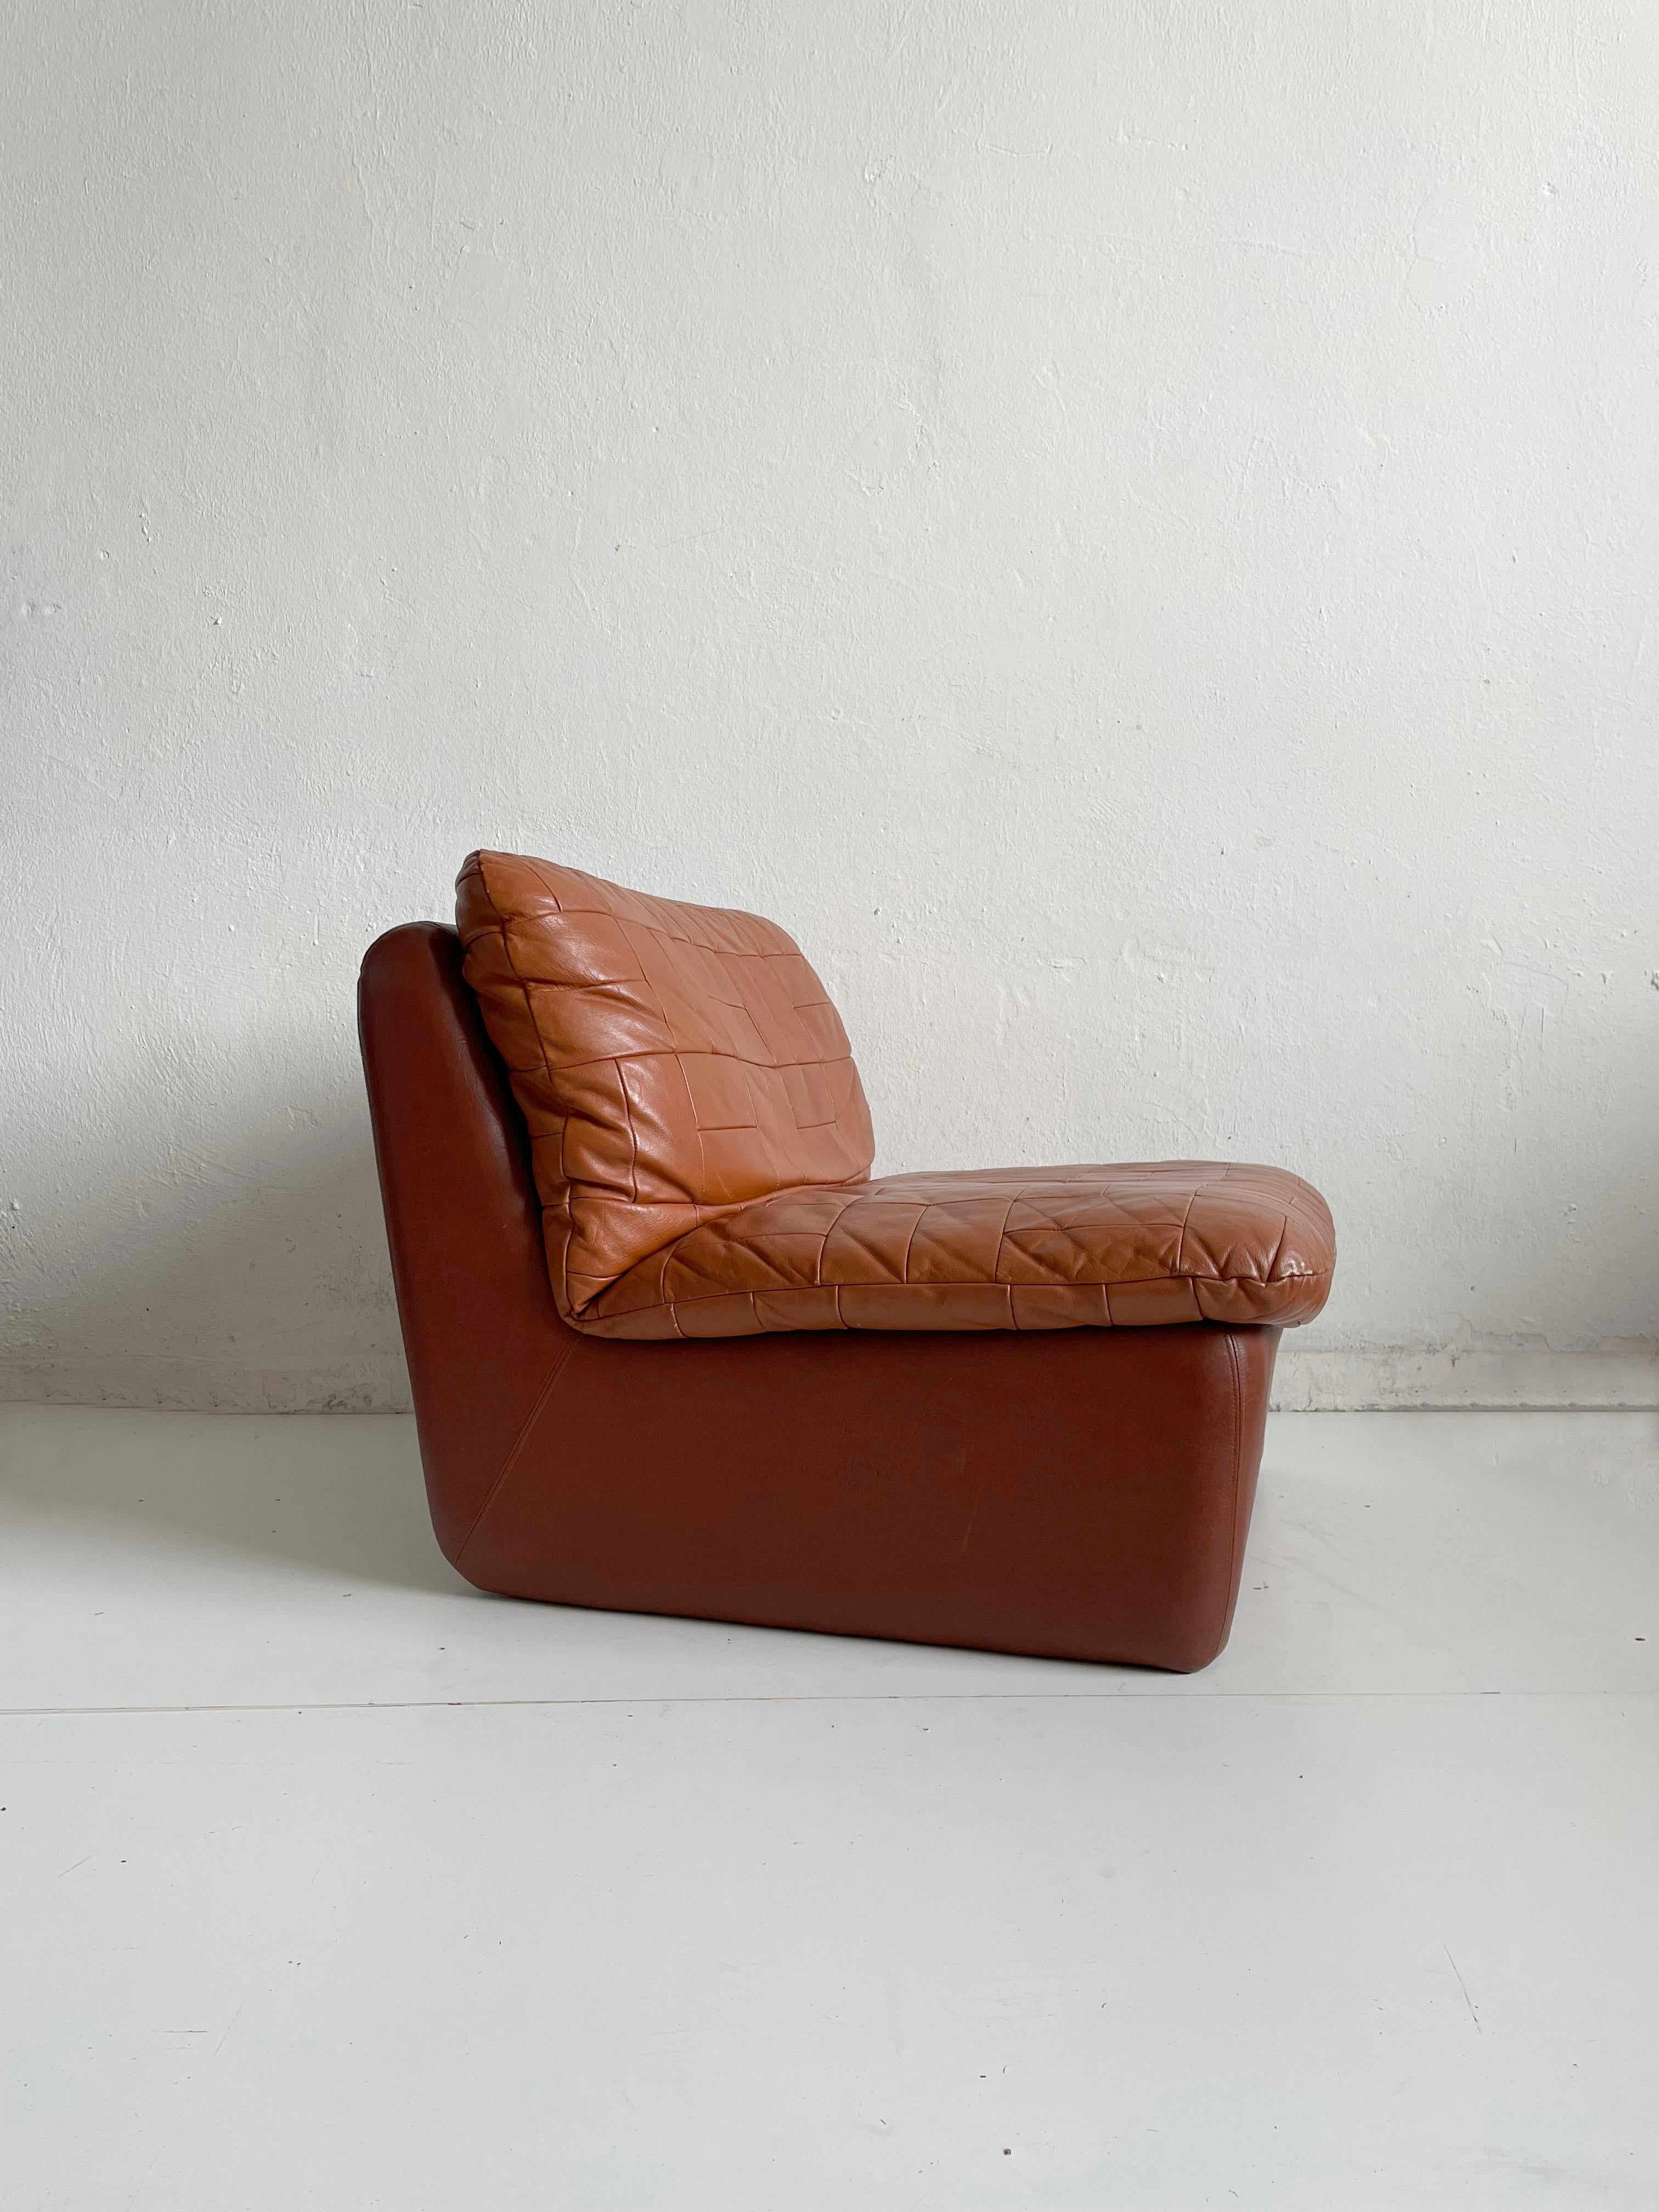 Vintage leather lounge chair manufactured by Overman of Sweden (ca. early 1970s). Composed of patchwork leather 'sling' seat sewn to caramel brown vinyl frame. 
Original soft and supple leather with beautiful patina and age with a few small traces